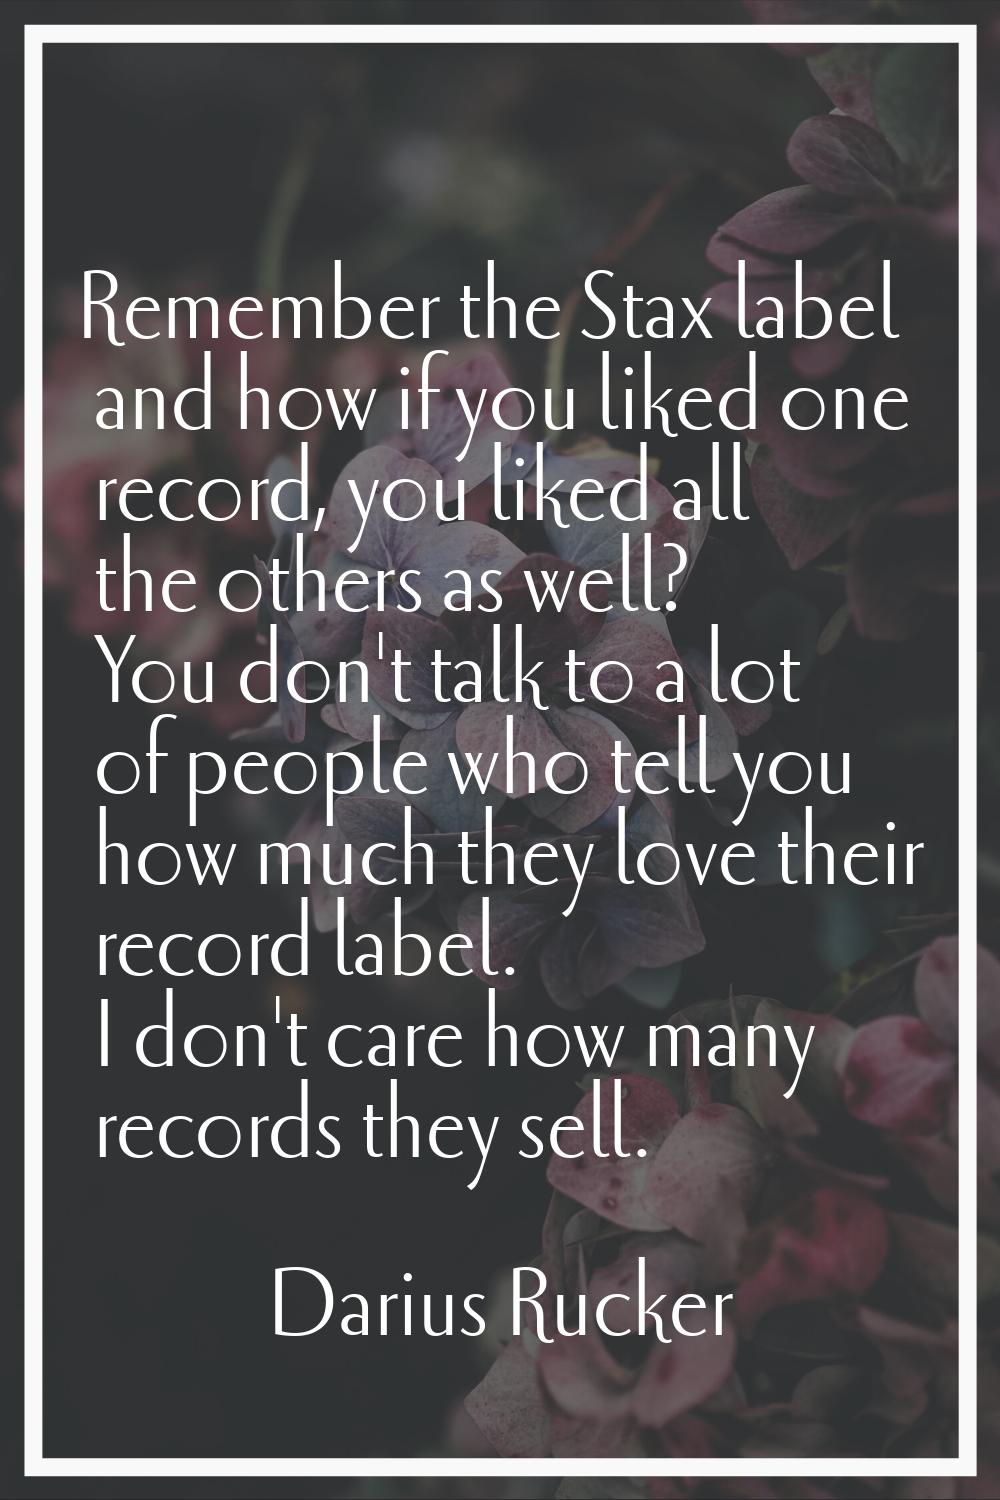 Remember the Stax label and how if you liked one record, you liked all the others as well? You don'